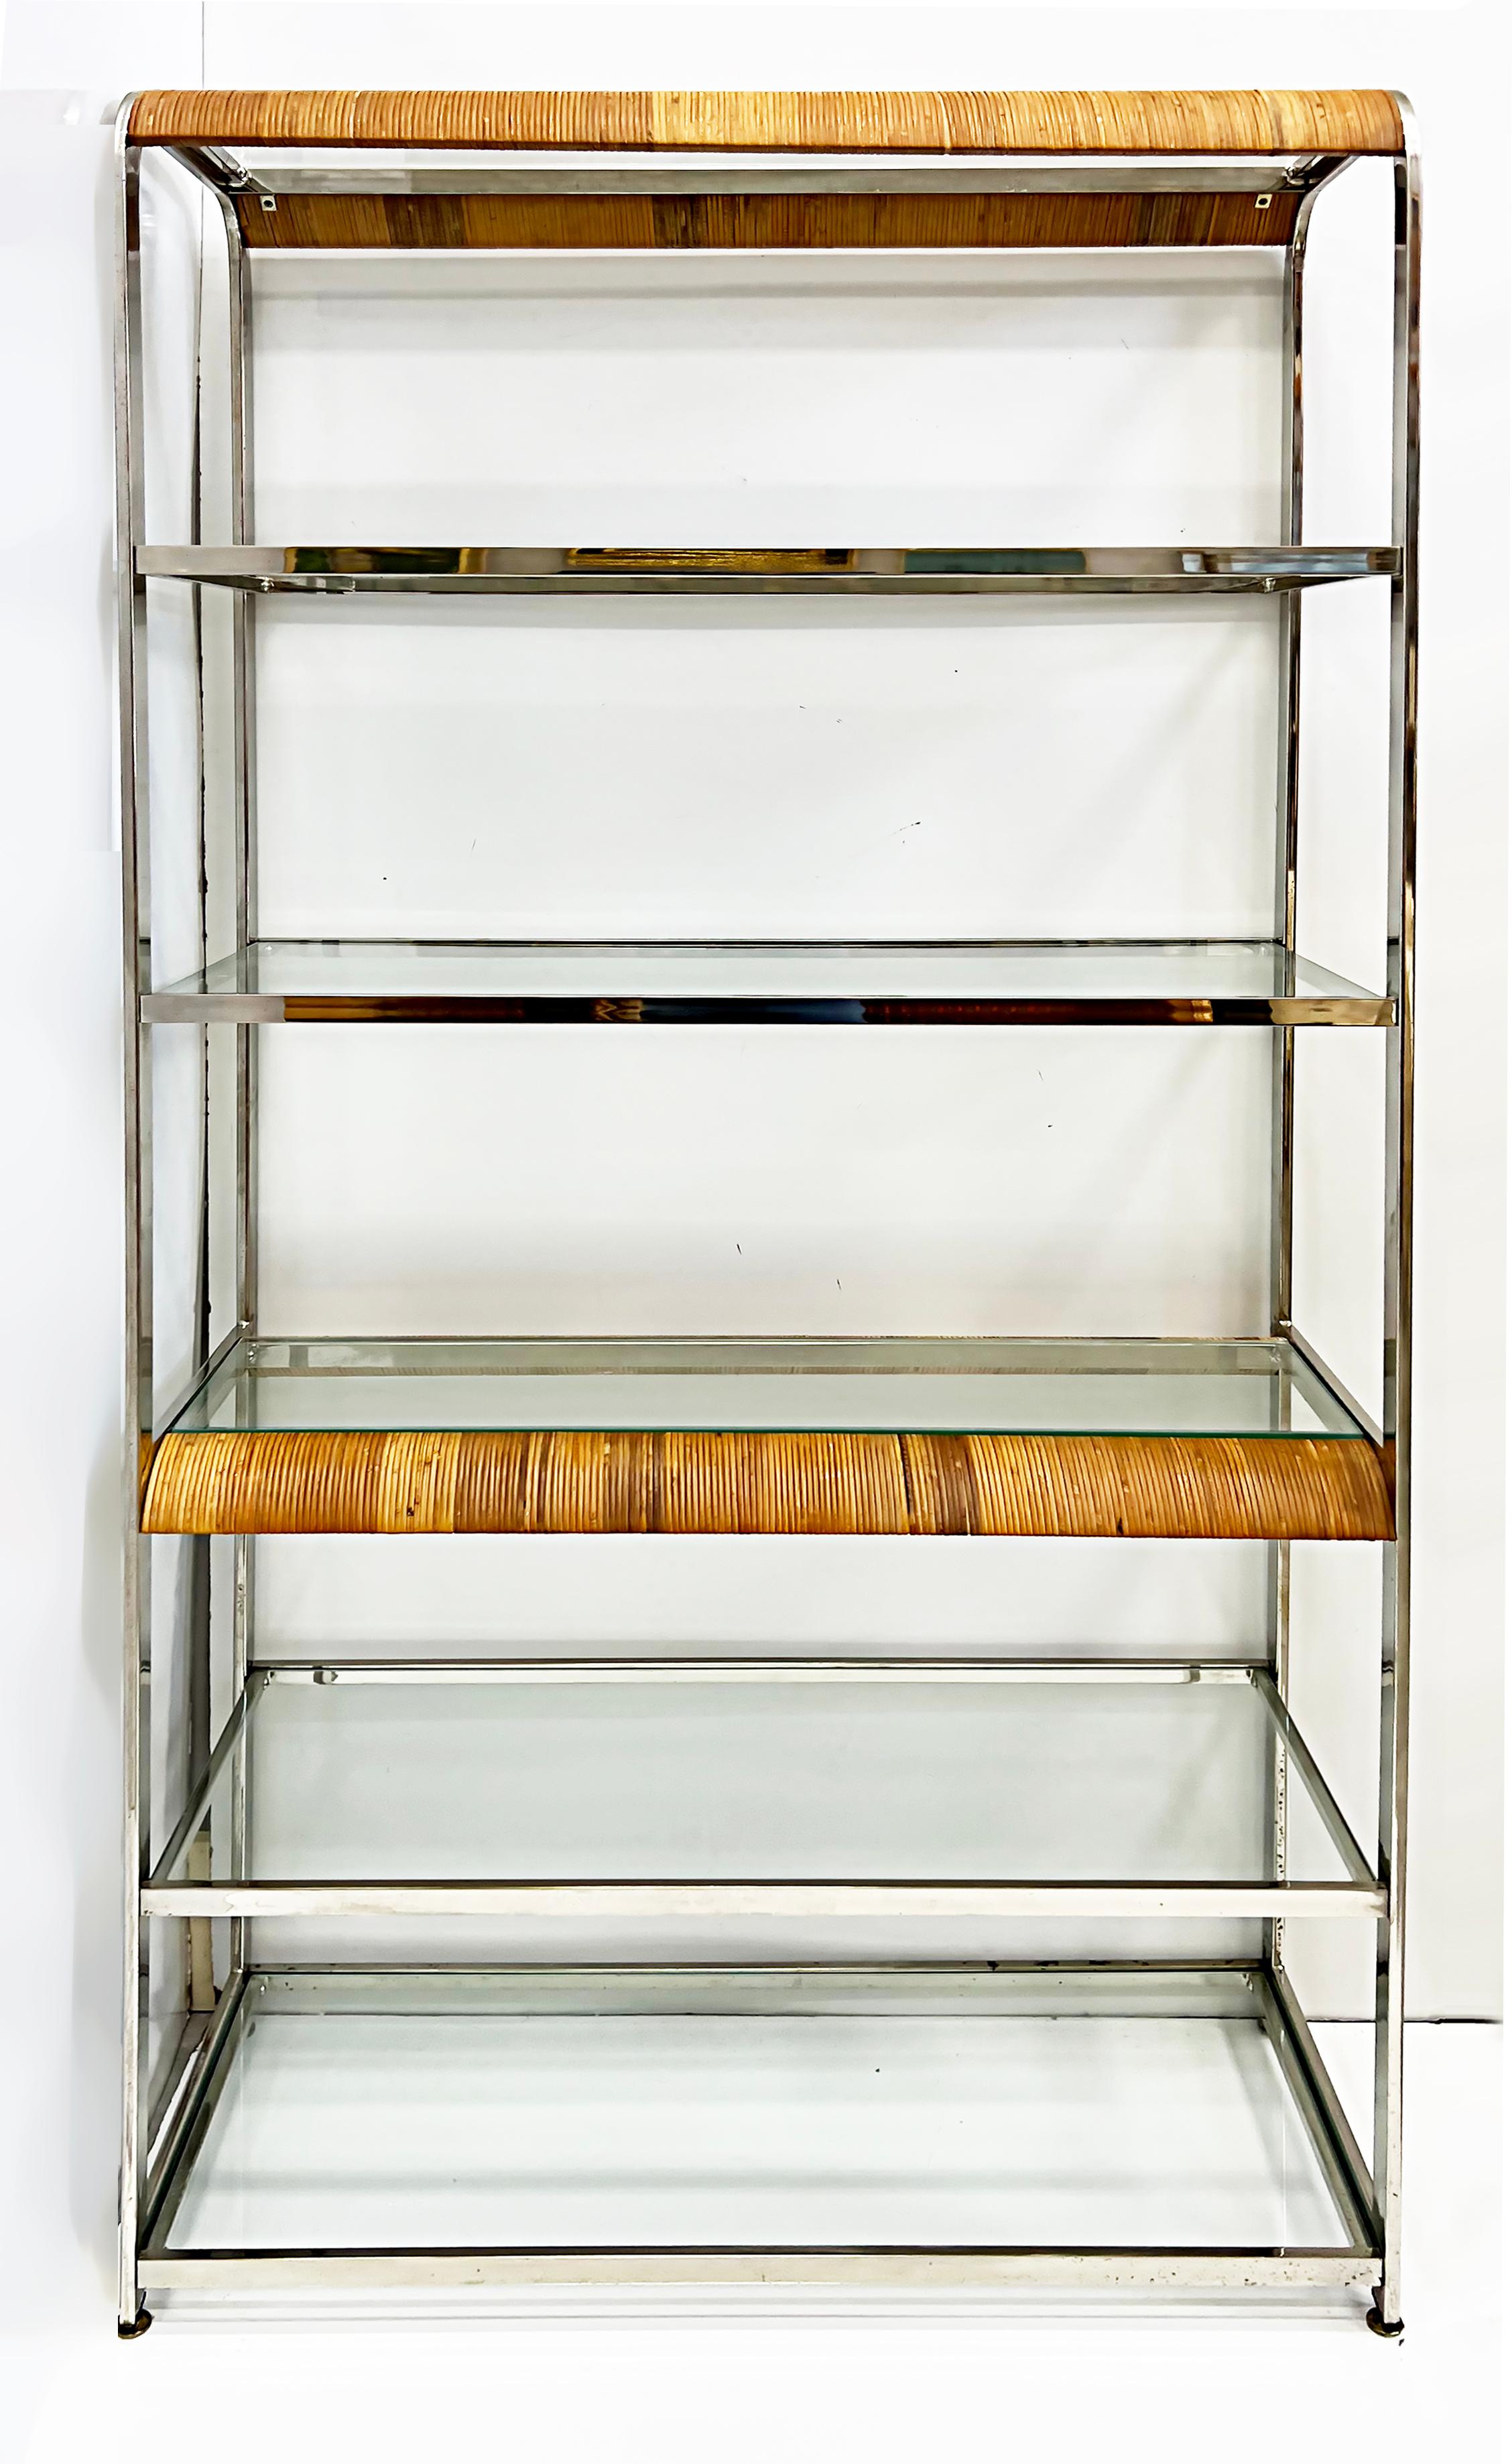 Coastal Chrome, Split Rattan Reed Etageres with glass shelves, pair.

Offered for sale is a pair of Coastal chrome and wrapped split rattan reed etageres with glass shelves. The chrome is very reflective and the design is clean but has a softer